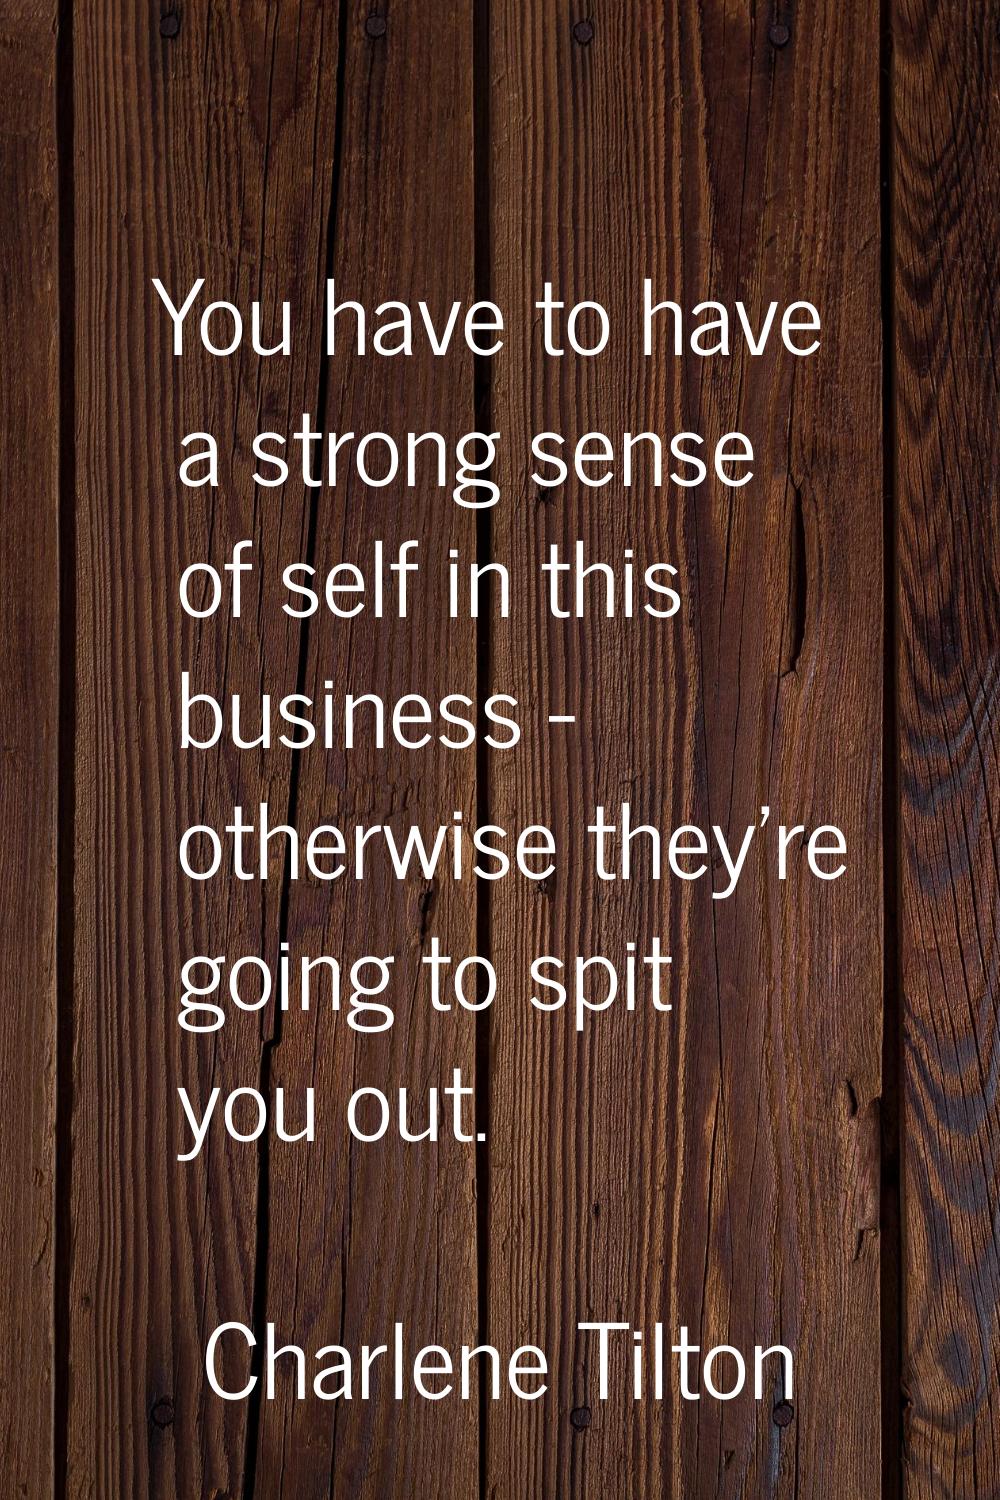 You have to have a strong sense of self in this business - otherwise they're going to spit you out.